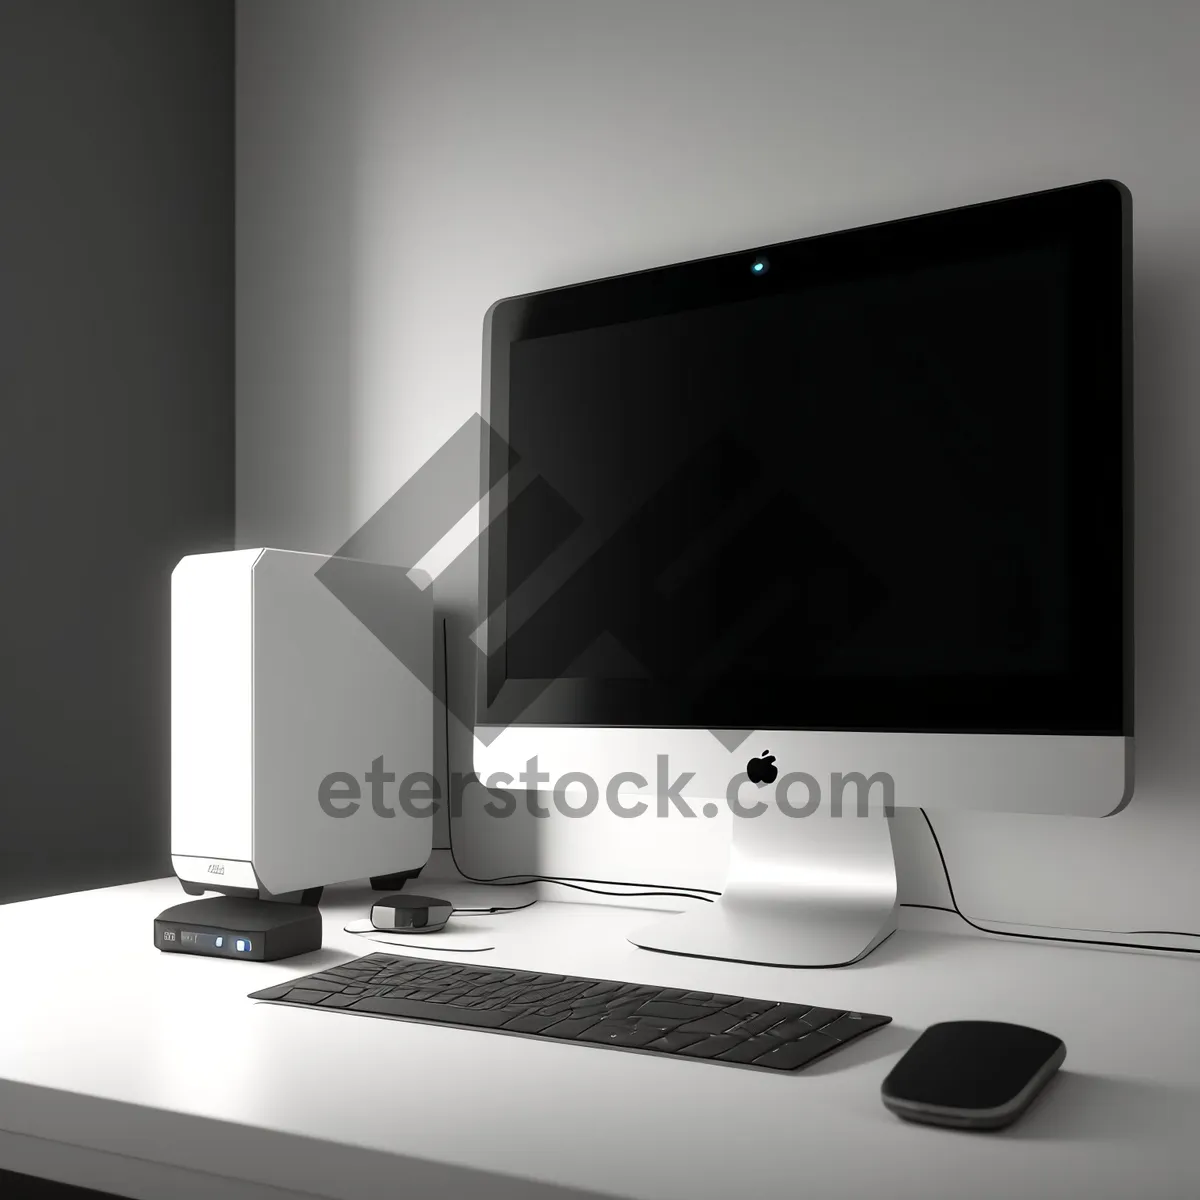 Picture of Modern Office Setup with Desktop Computer and Monitor